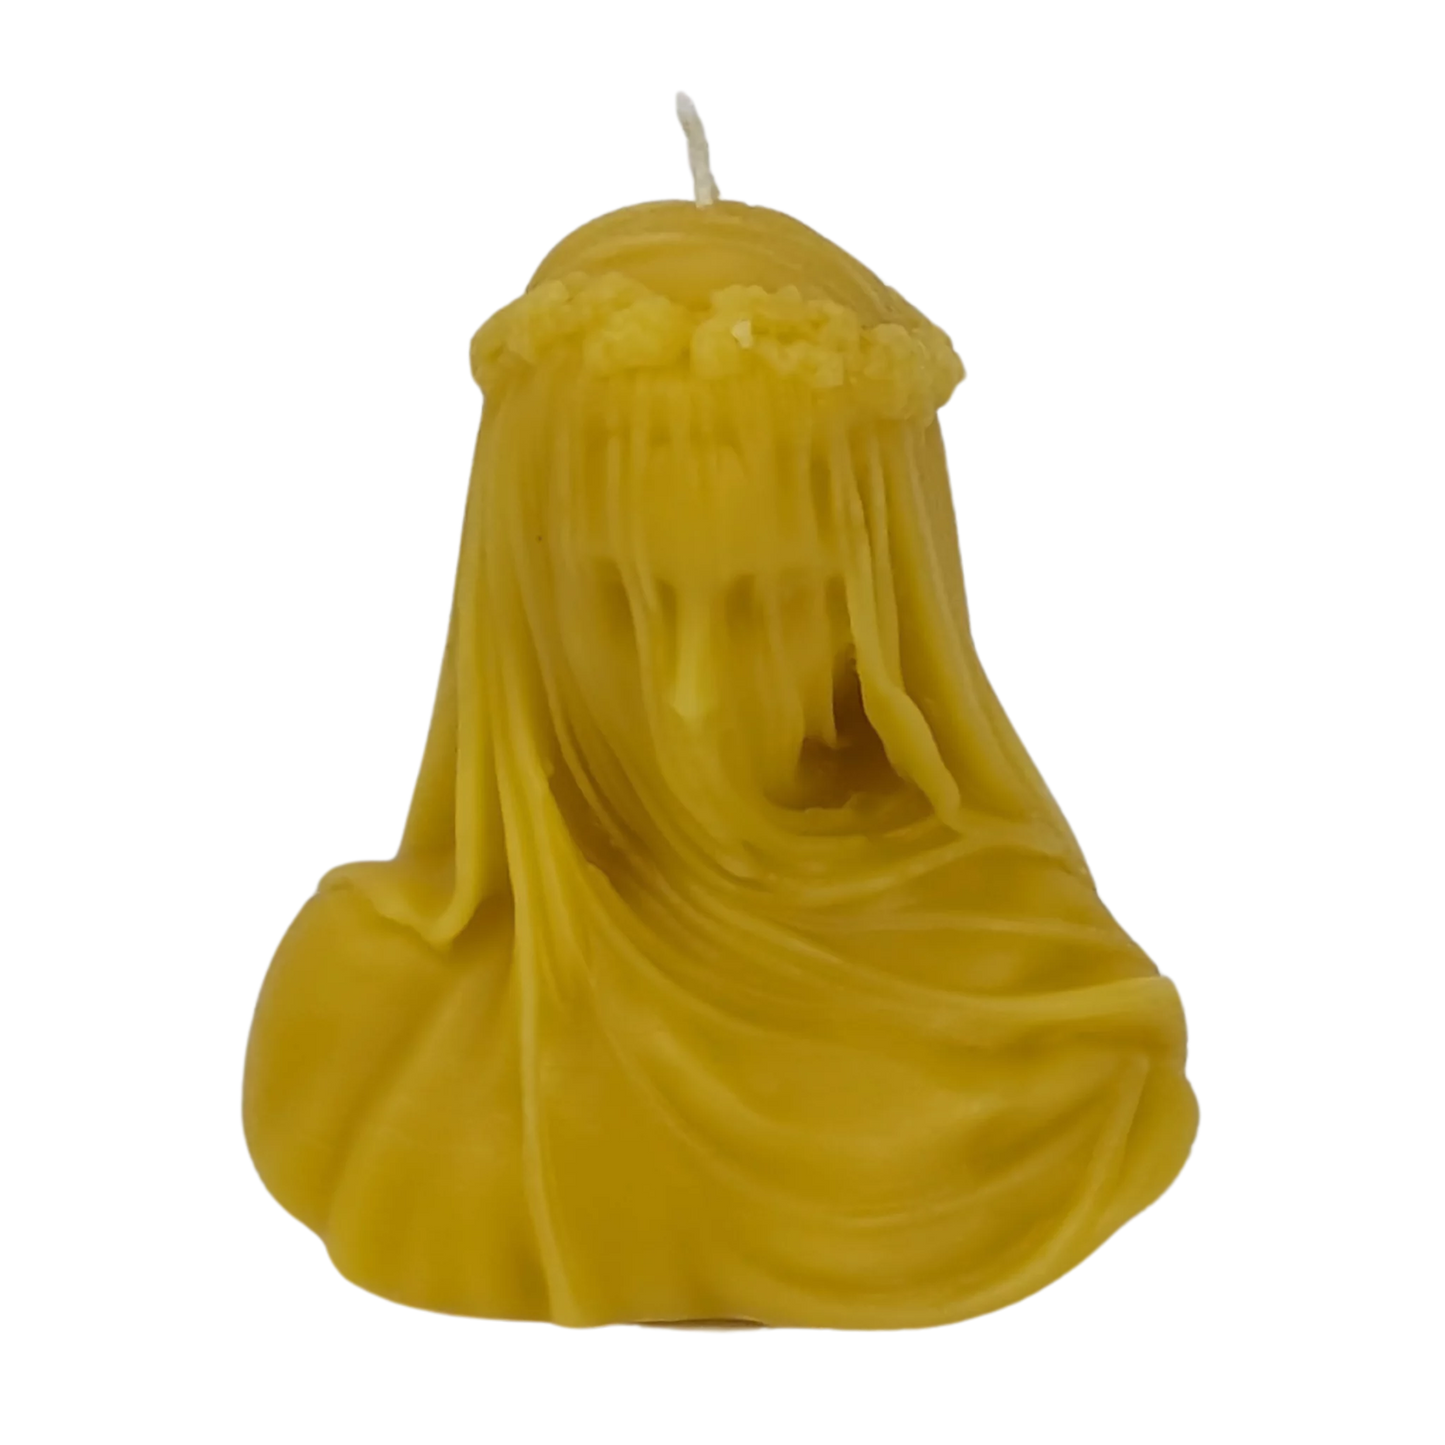 Art-inspired beeswax candle shaped as a veiled lady, adding a touch of mystery and history to your home decor.